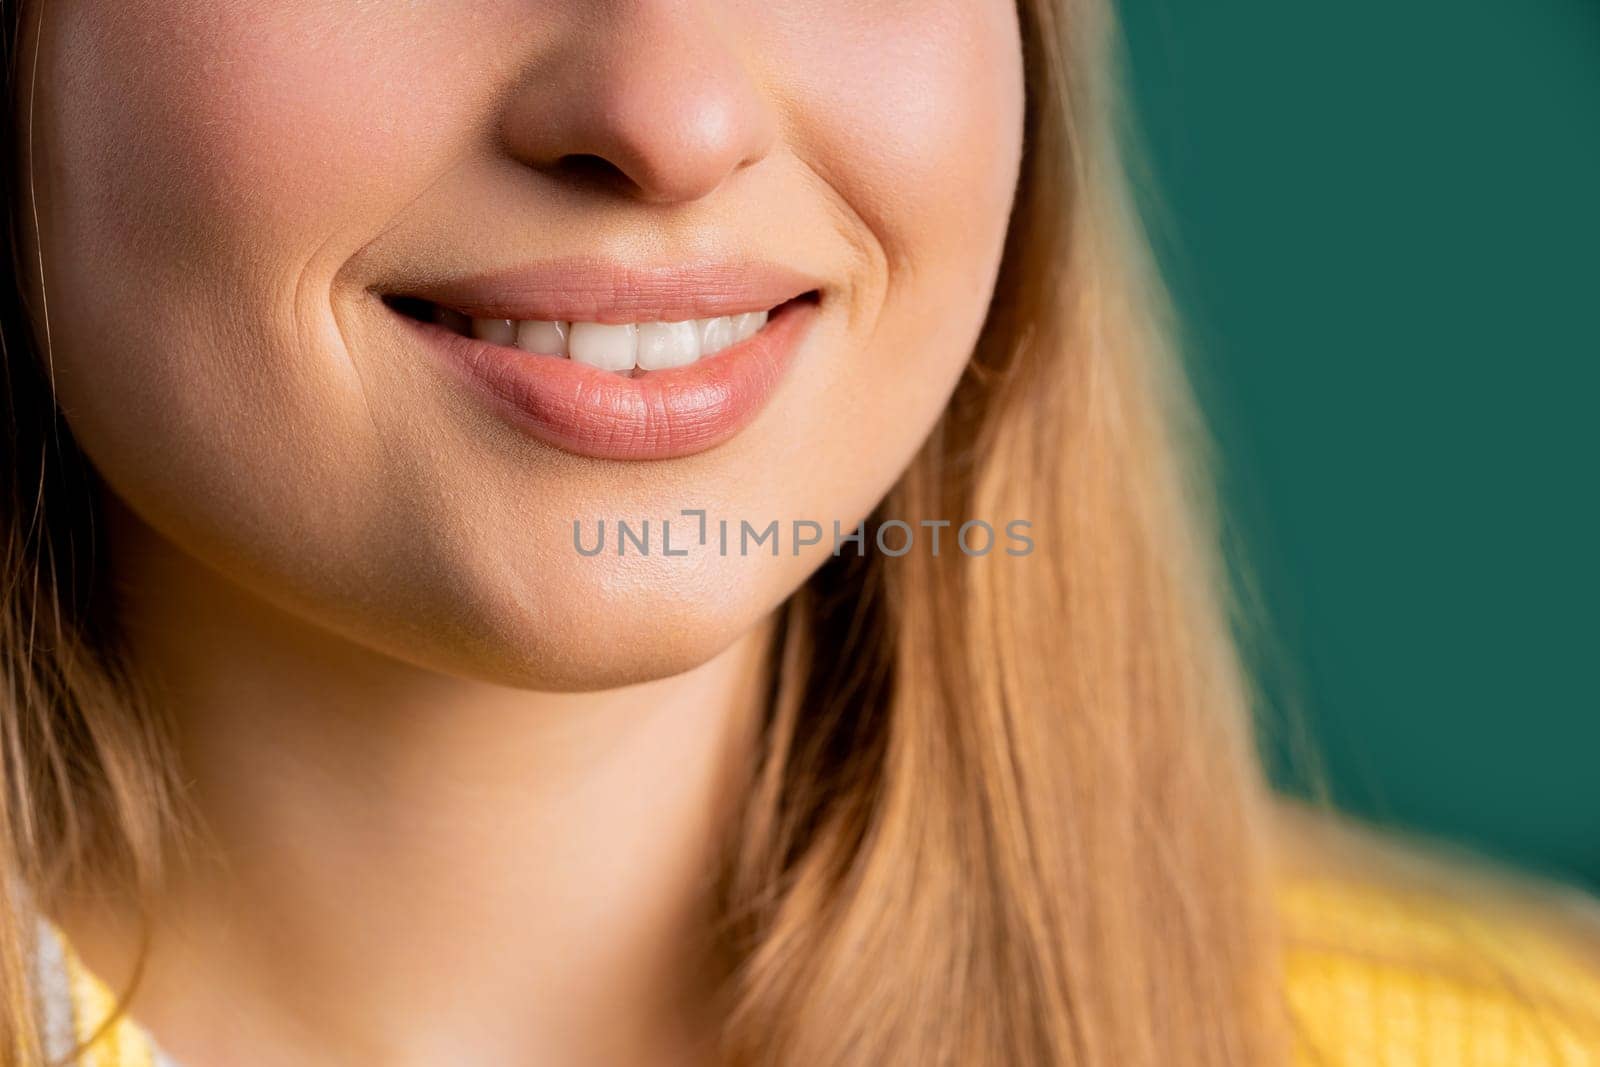 Mouth of charming smiling blonde woman. Perfect healthy teeth, lips, kind smile by kristina_kokhanova